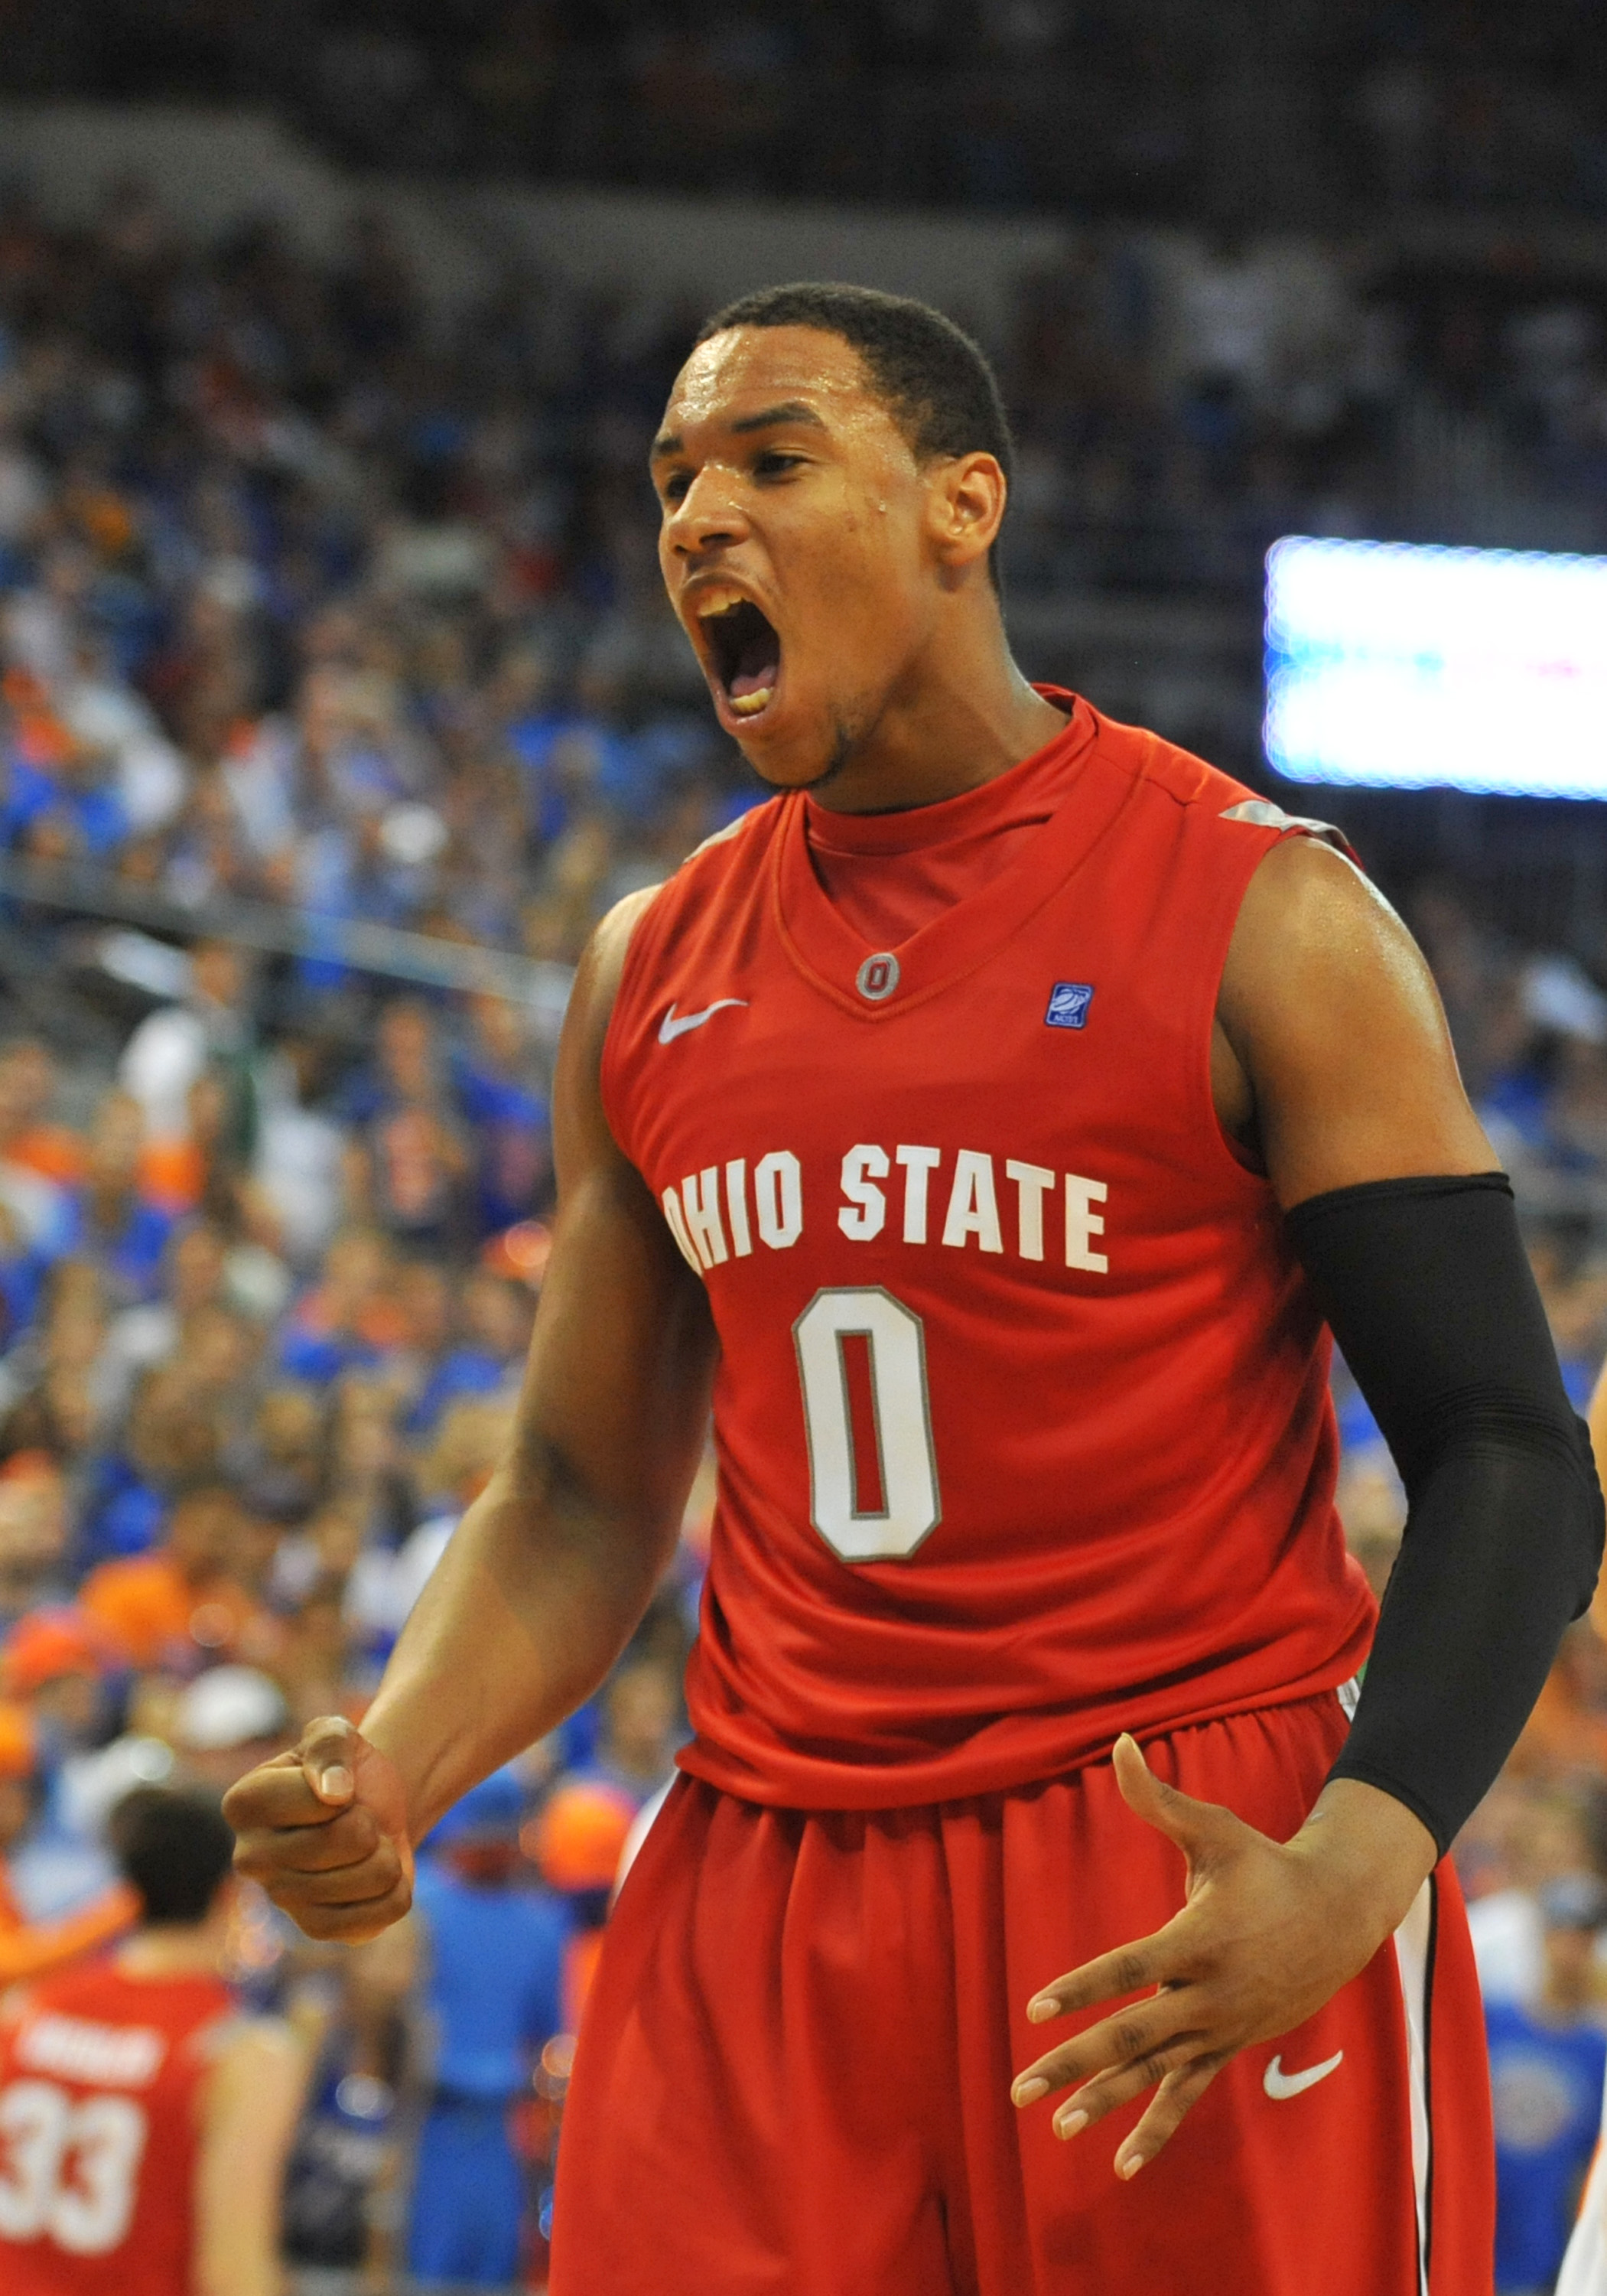 GAINESVILLE, FL - NOVEMBER 16: Forward Jared Sullinger #0 of the Ohio State Buckeyes yells after a dunk against the Florida Gators November 16, 2010 at the Stephen C. O'Connell Center in Gainesville, Florida.  (Photo by Al Messerschmidt/Getty Images)